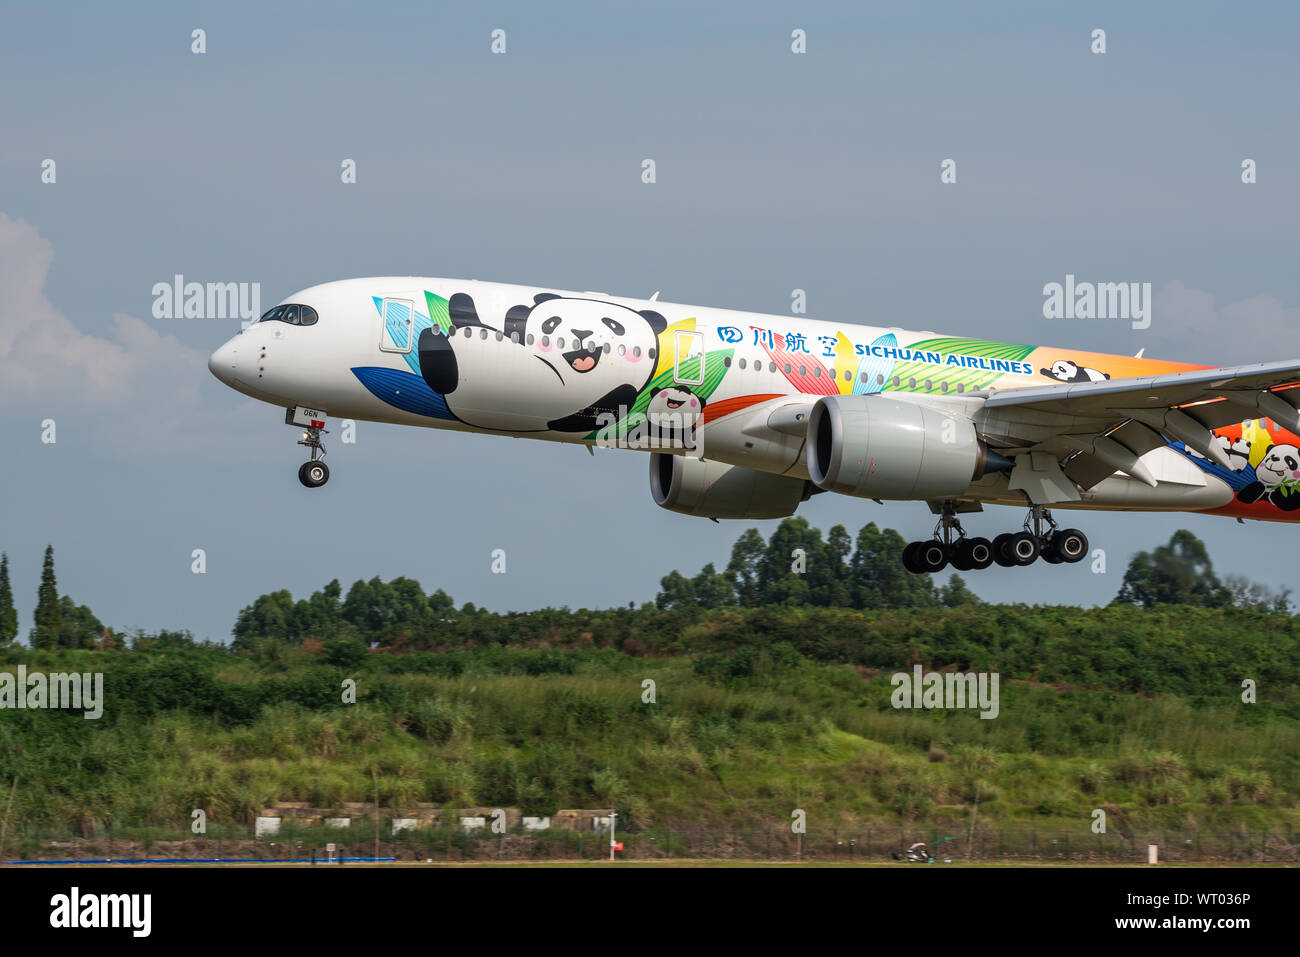 Flughafen Chengdu, Provinz Sichuan, China - 28. August 2019: Sichuan Airlines Airbus A350 Commercial Airplane Landing in Chengdu. Stockfoto